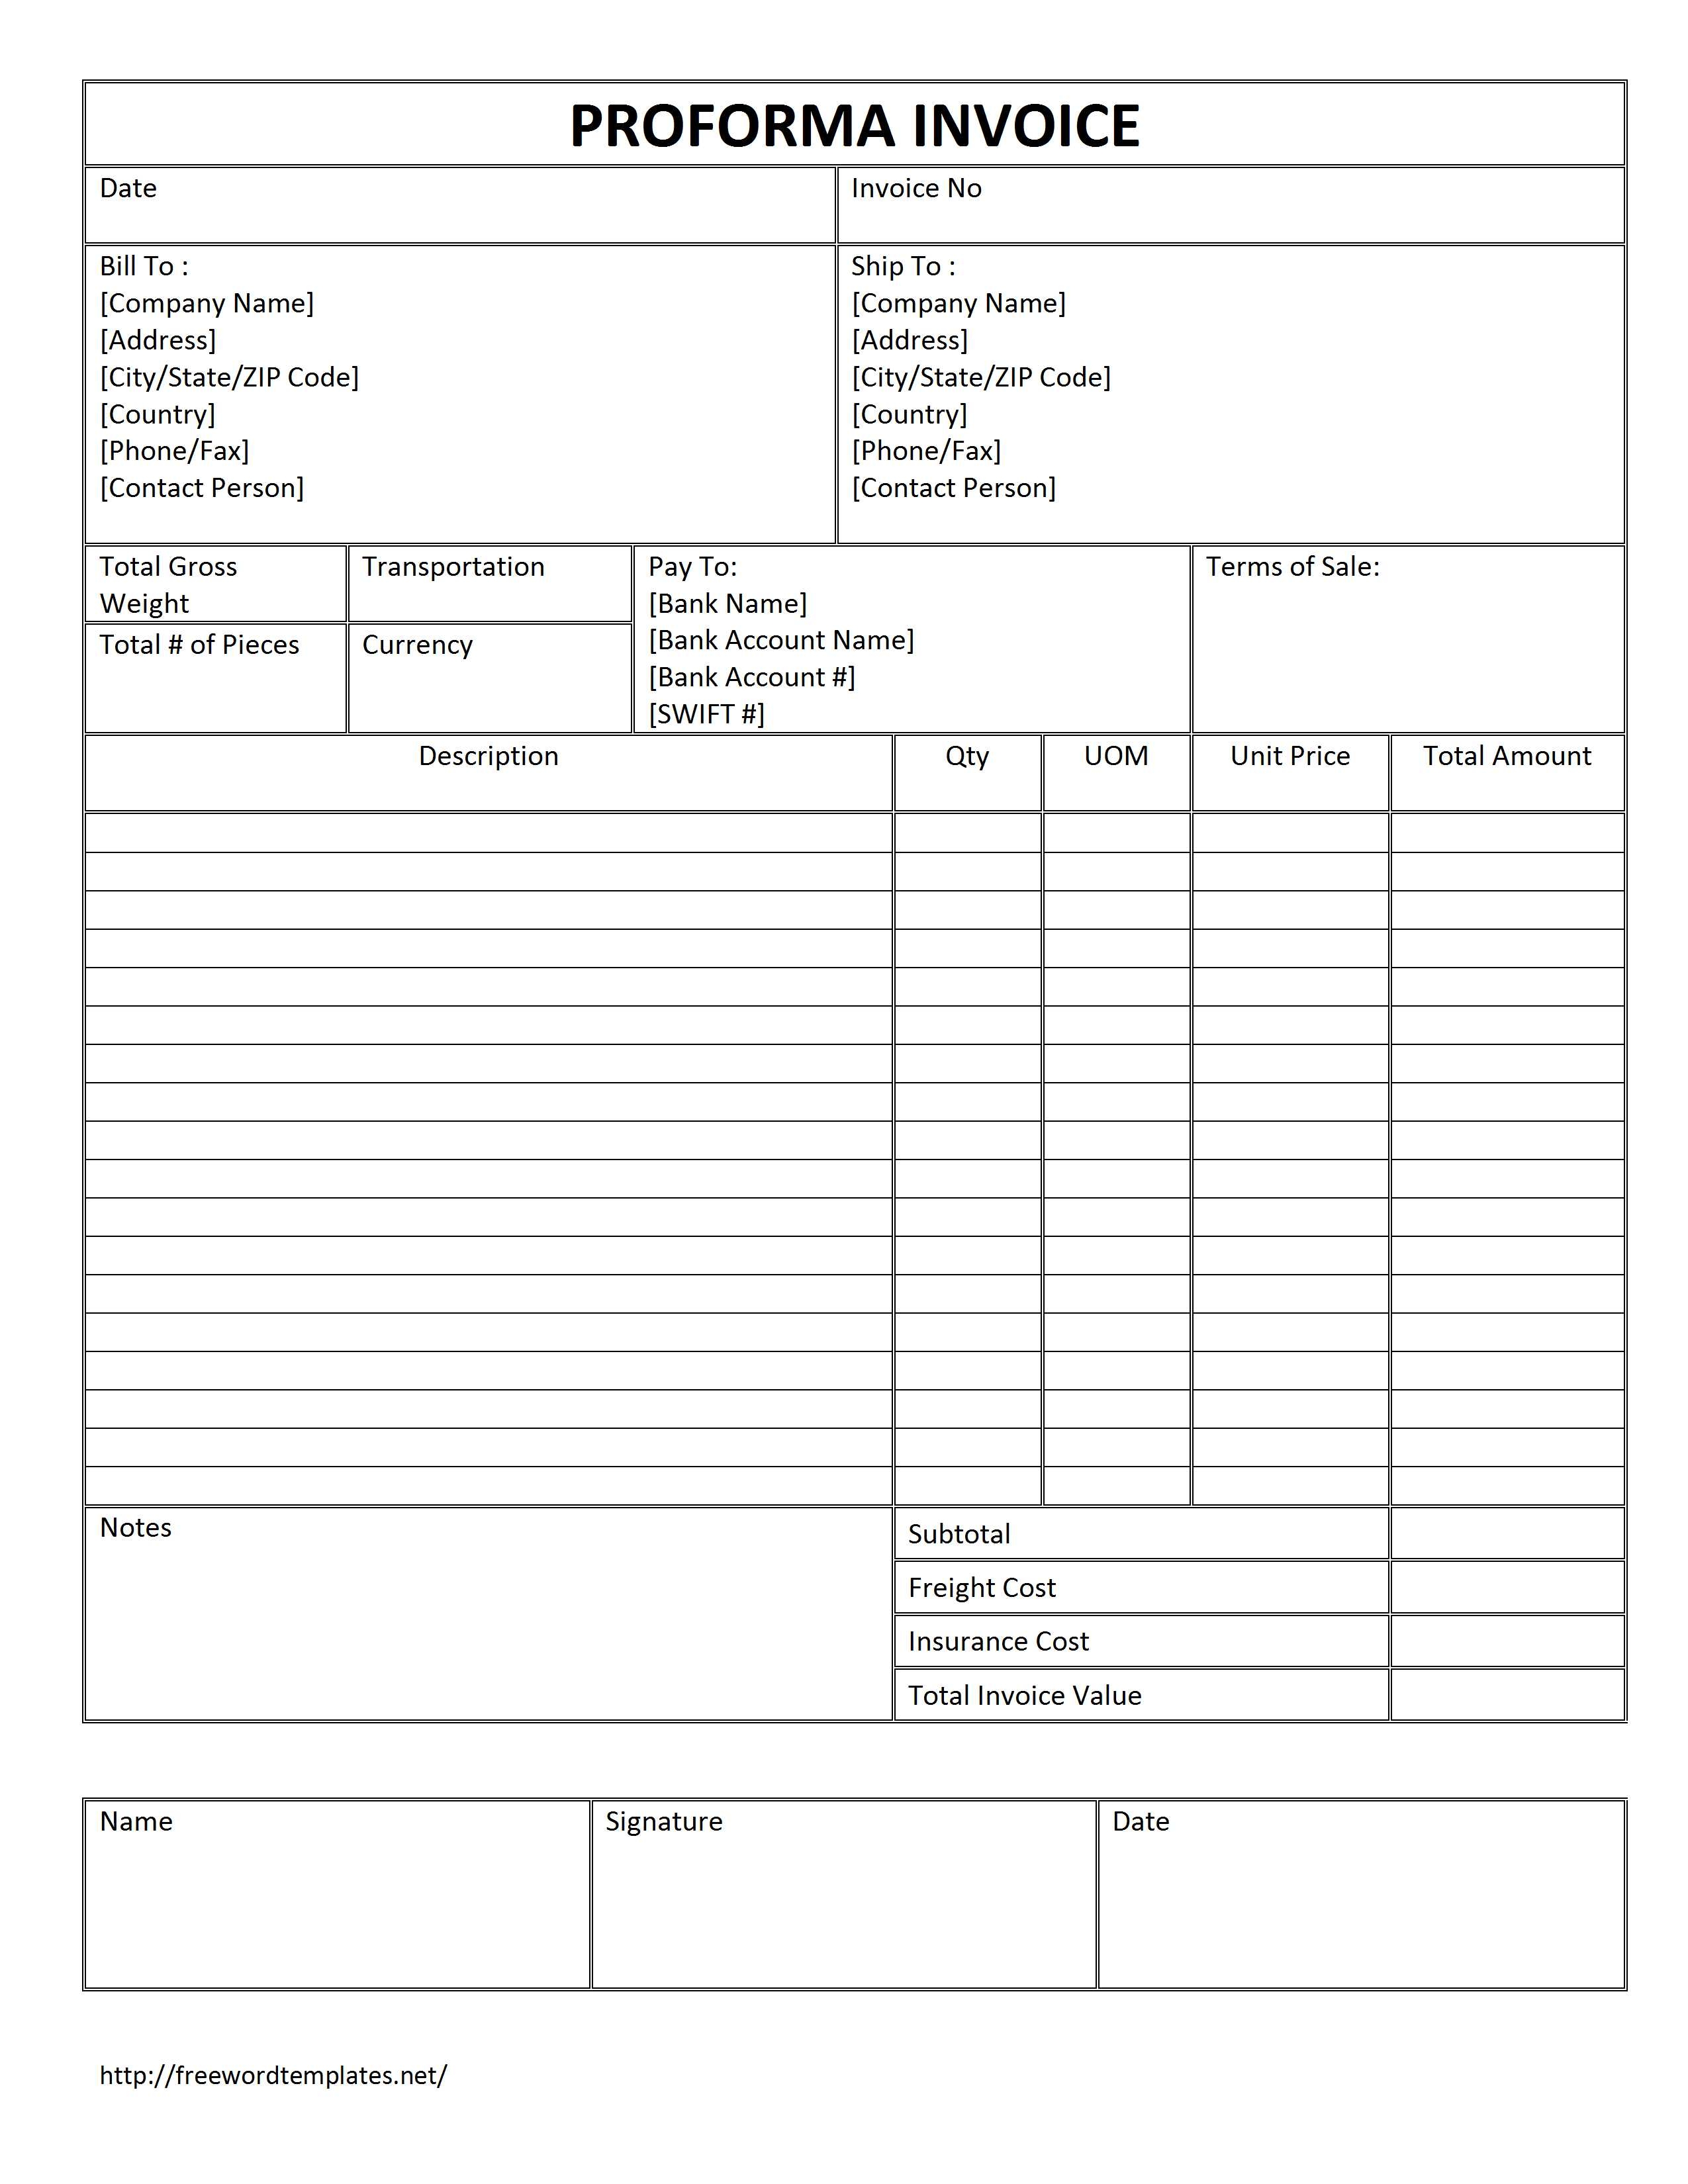 commercial invoice freewordtemplates commercial invoice template word